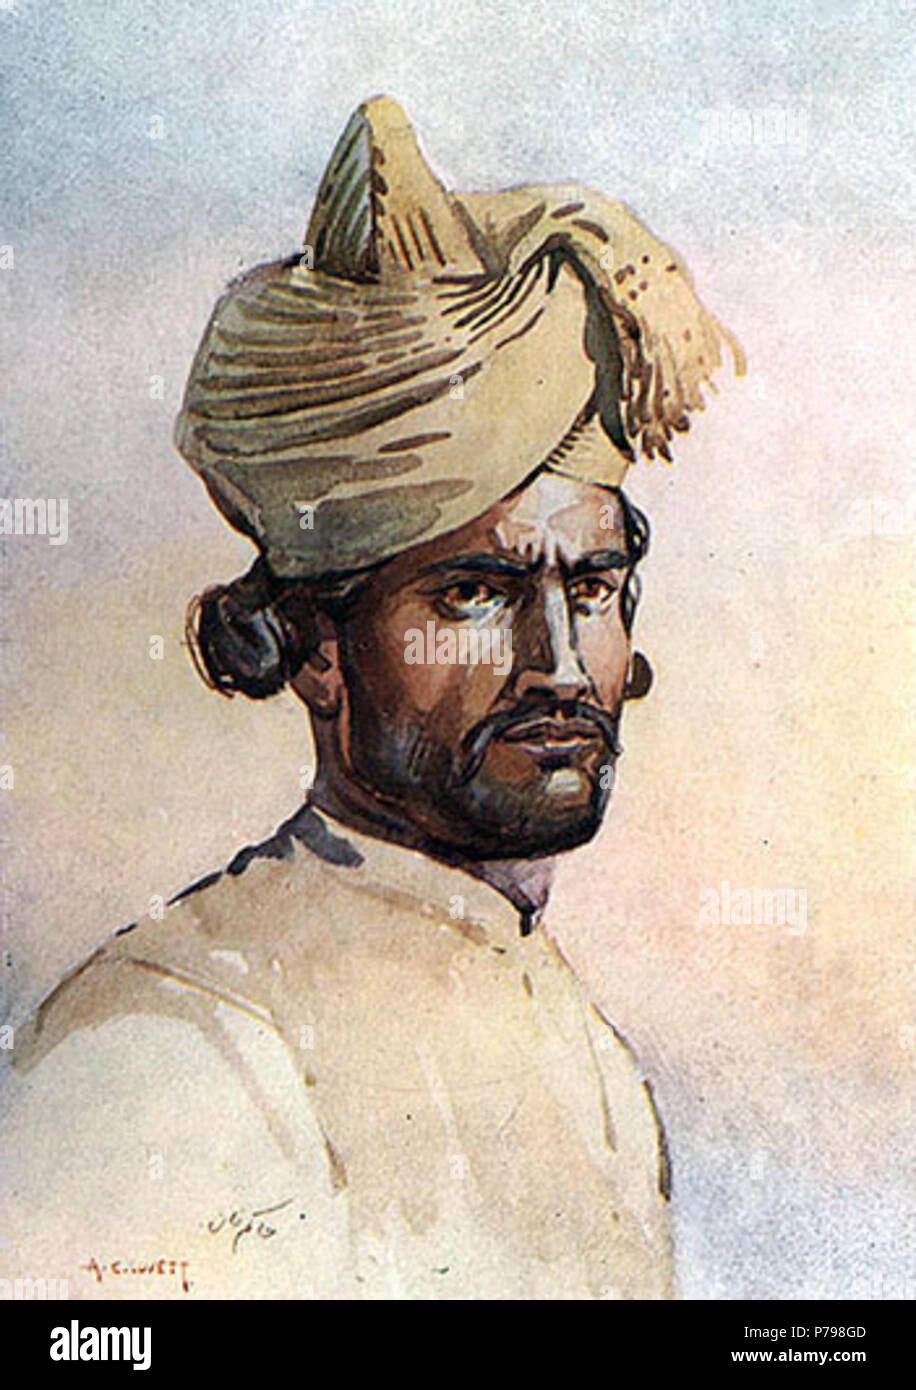 English: Watercolour of an Awan sepoy, painted by Major A.C. Lovett, circa the early 20th century. The painting is included in the book, The Armies of India (published in 1911). 1911 11 Awan Sepoy (82nd Punjabis) Stock Photo